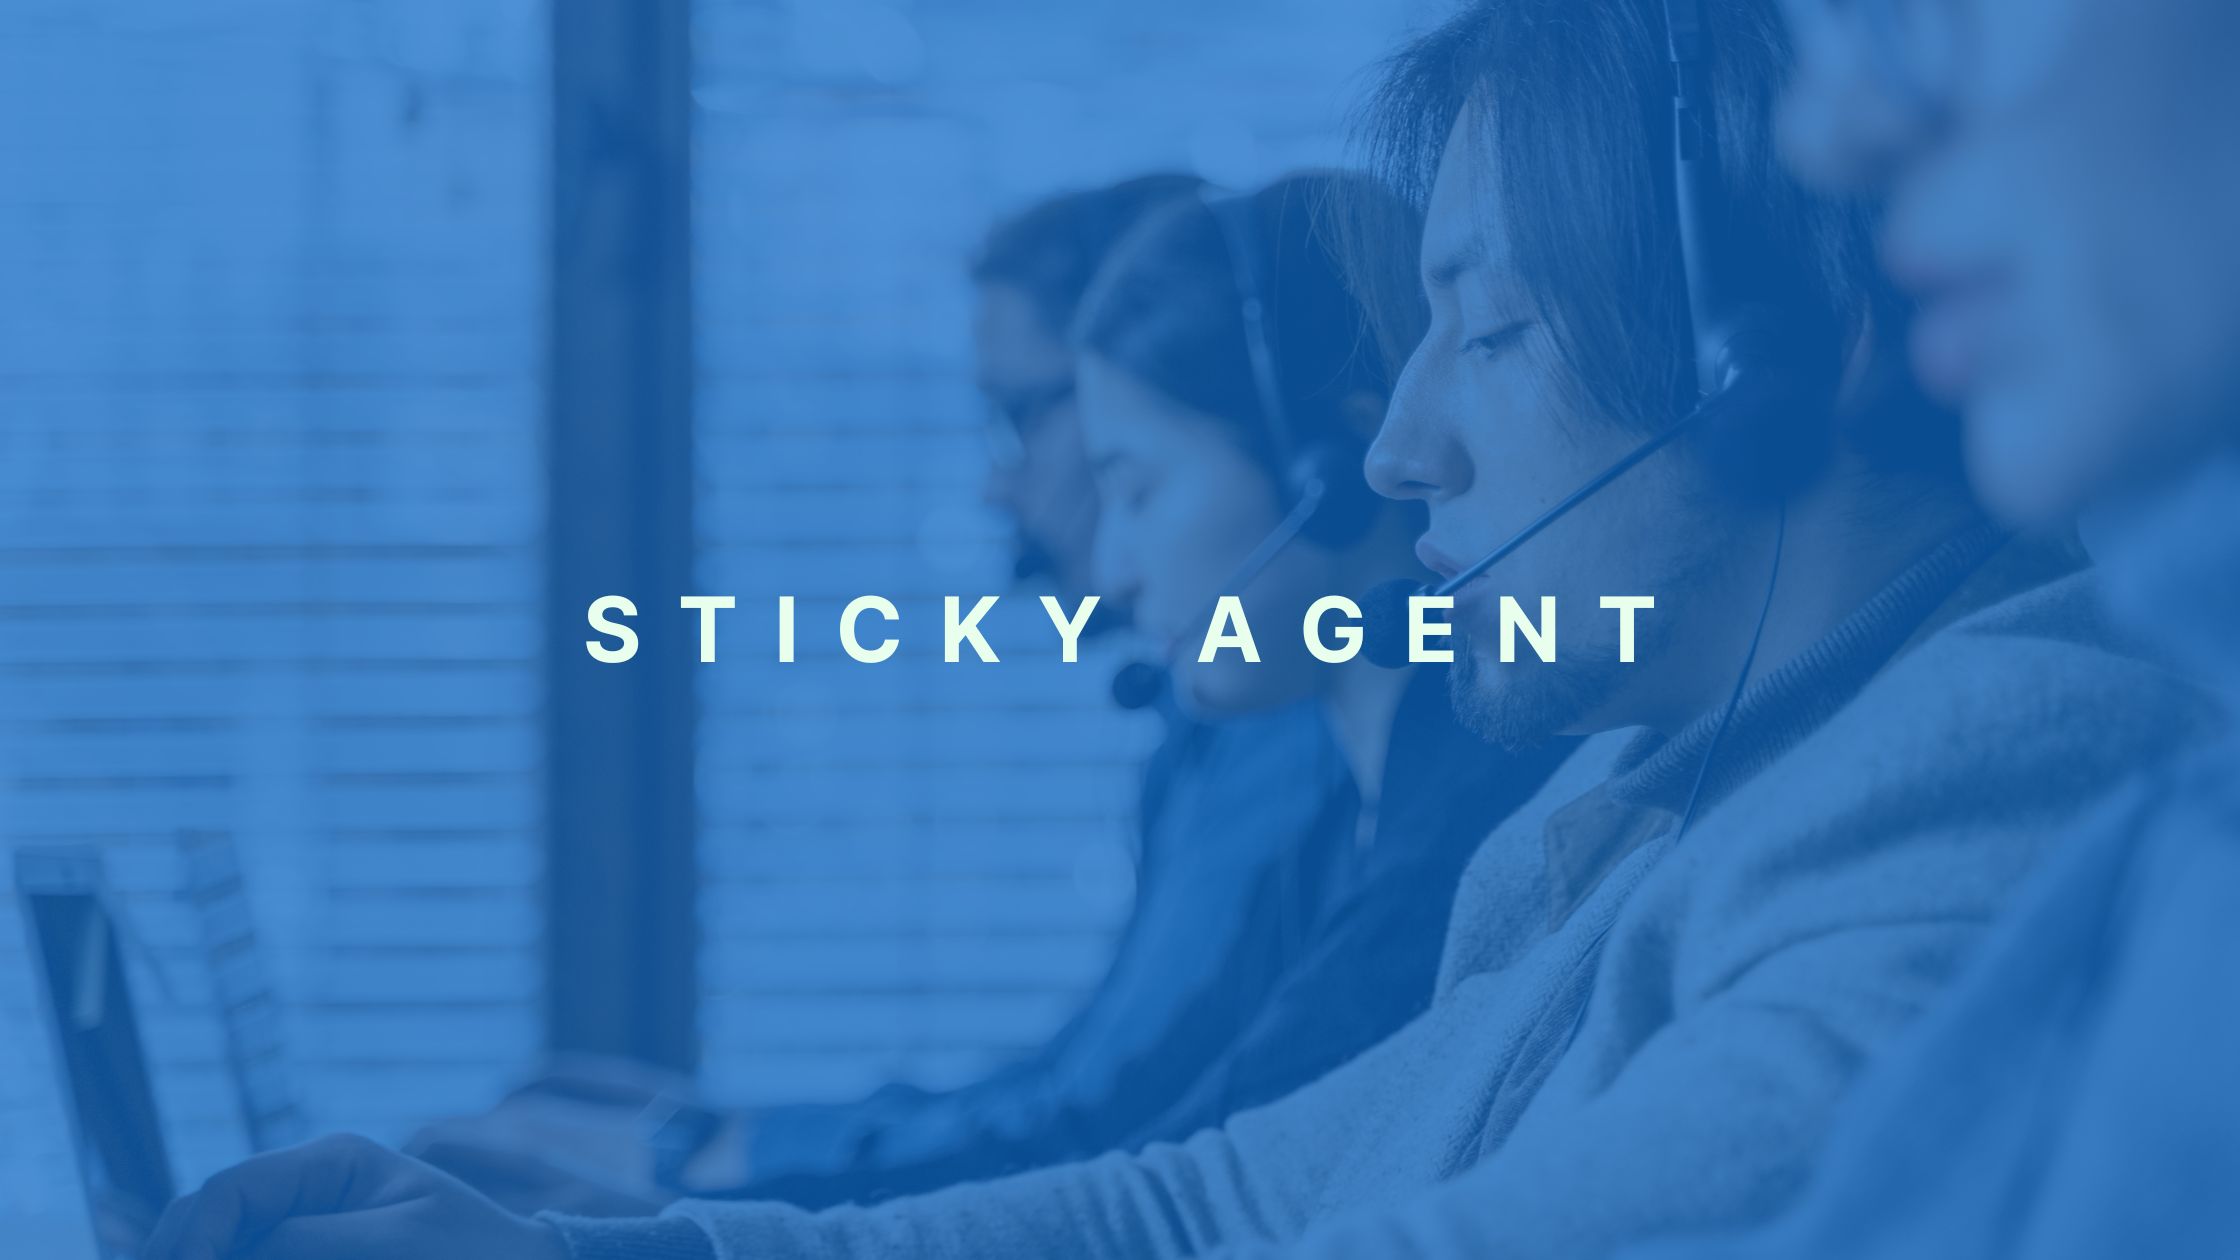 Sticky Agent – How Does It Improve Your Customer Experience?